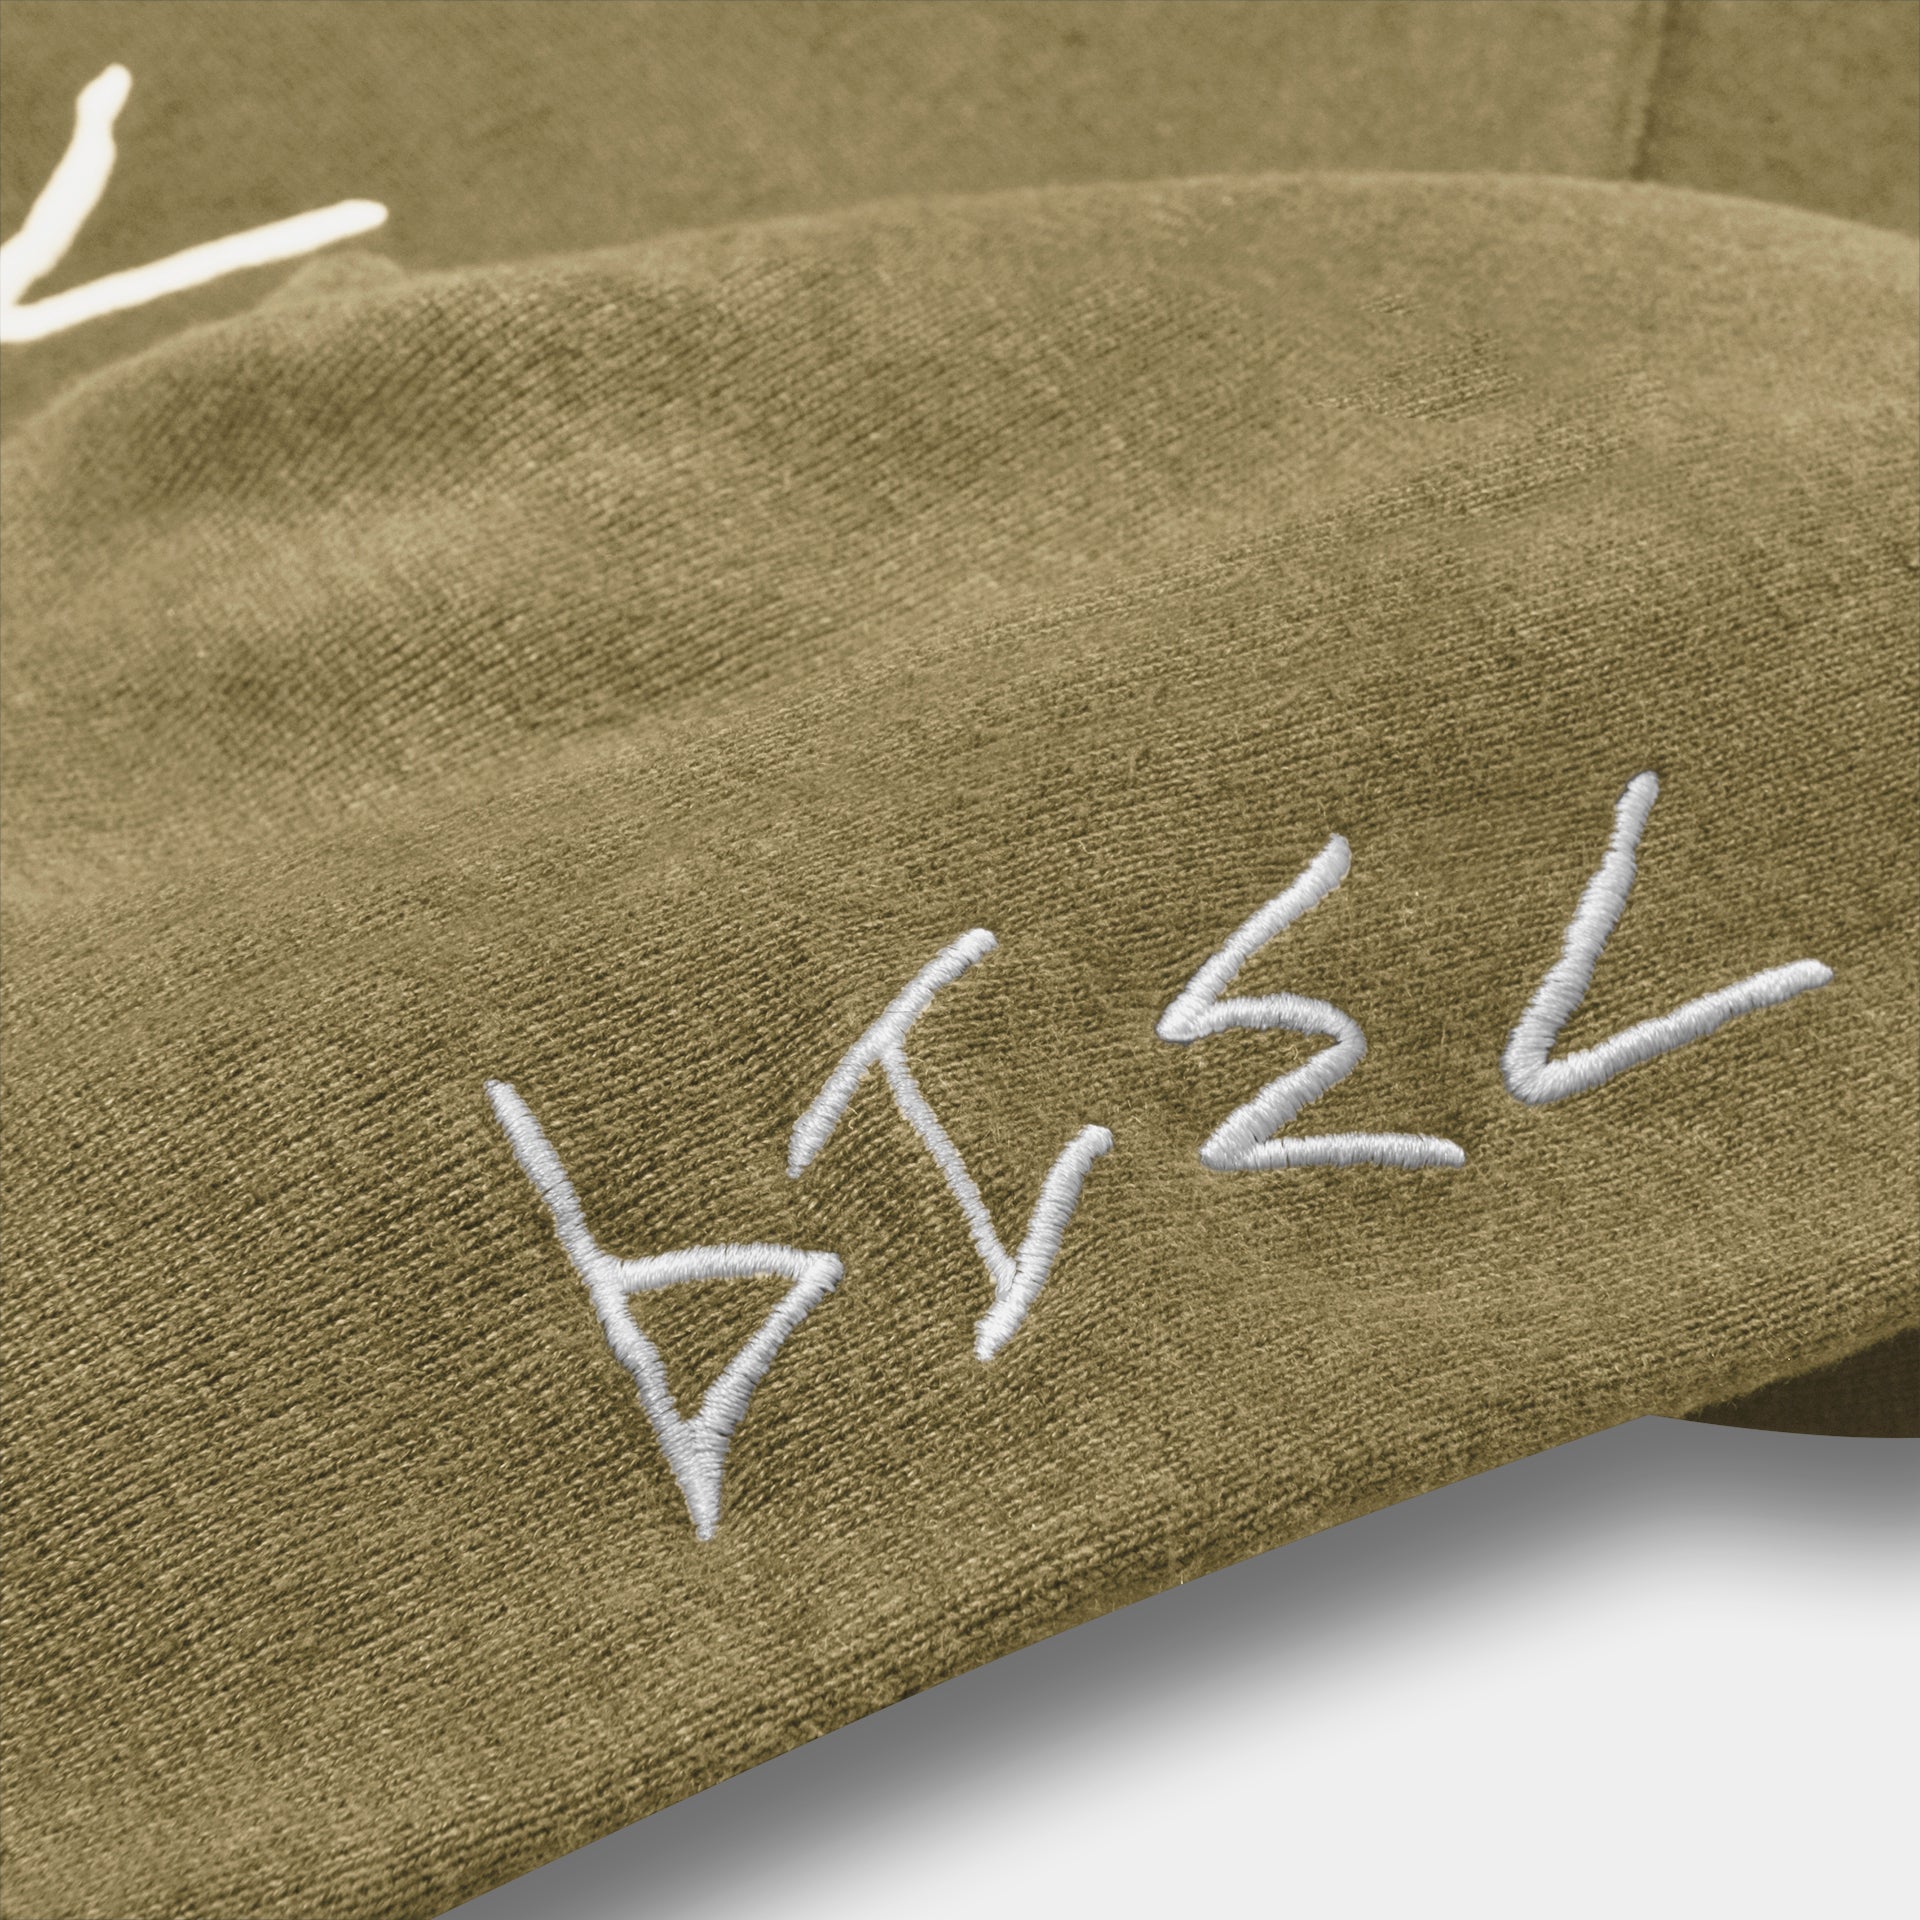 Olive 7319 hemp hoodie zoomed into stitching/embroidery. High quality sustainable material. 